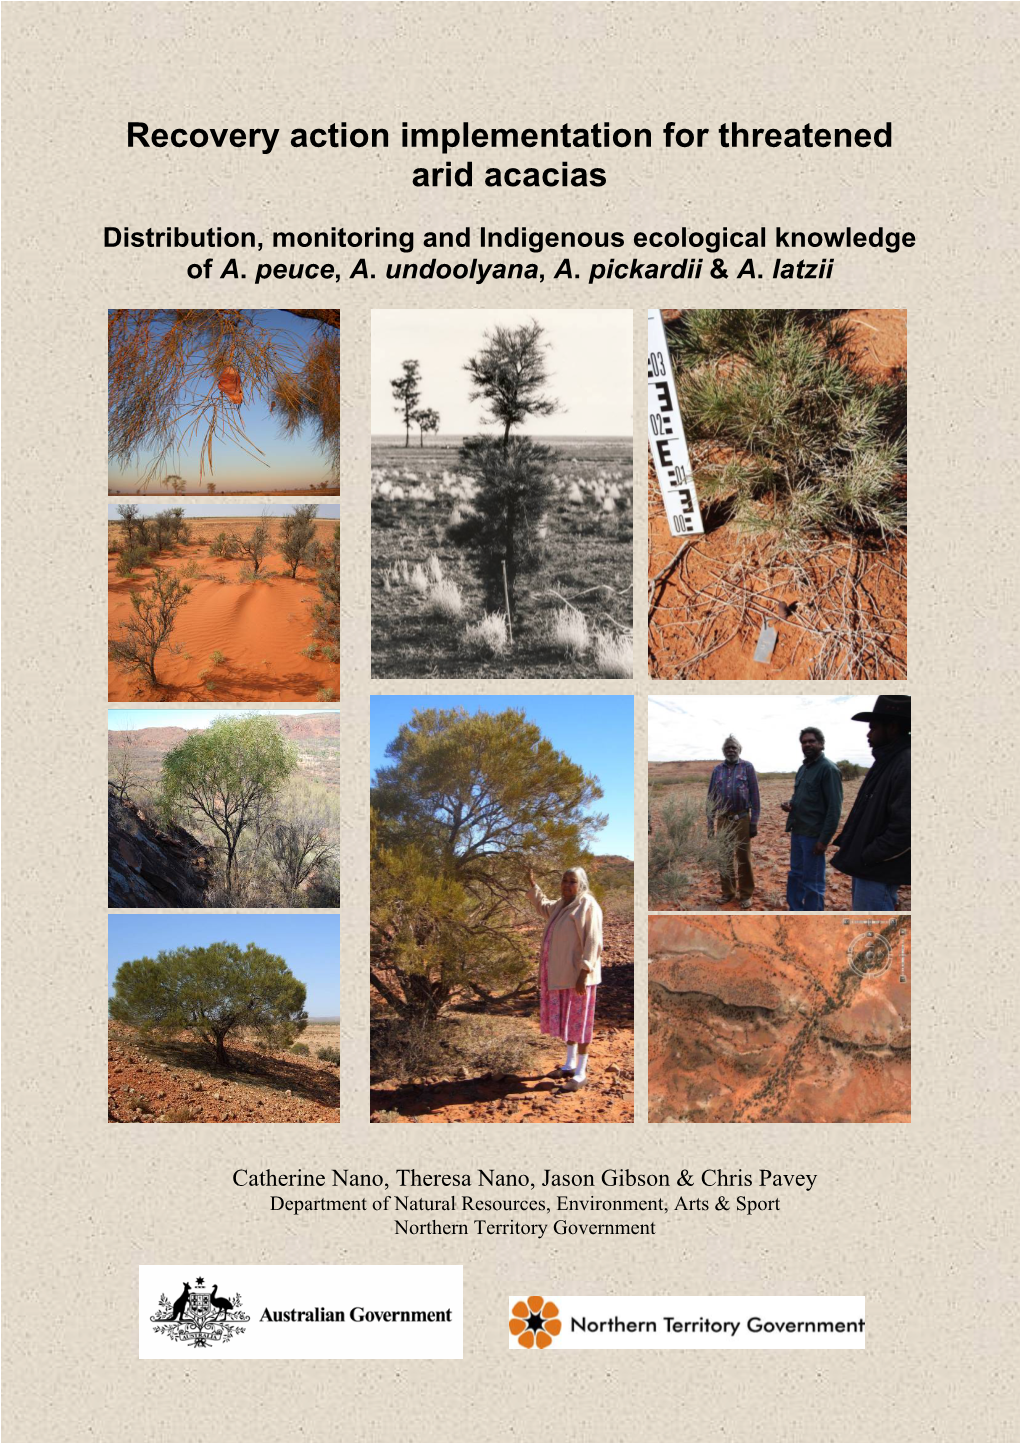 Recovery Action Implementation for Threatened Arid Acacias